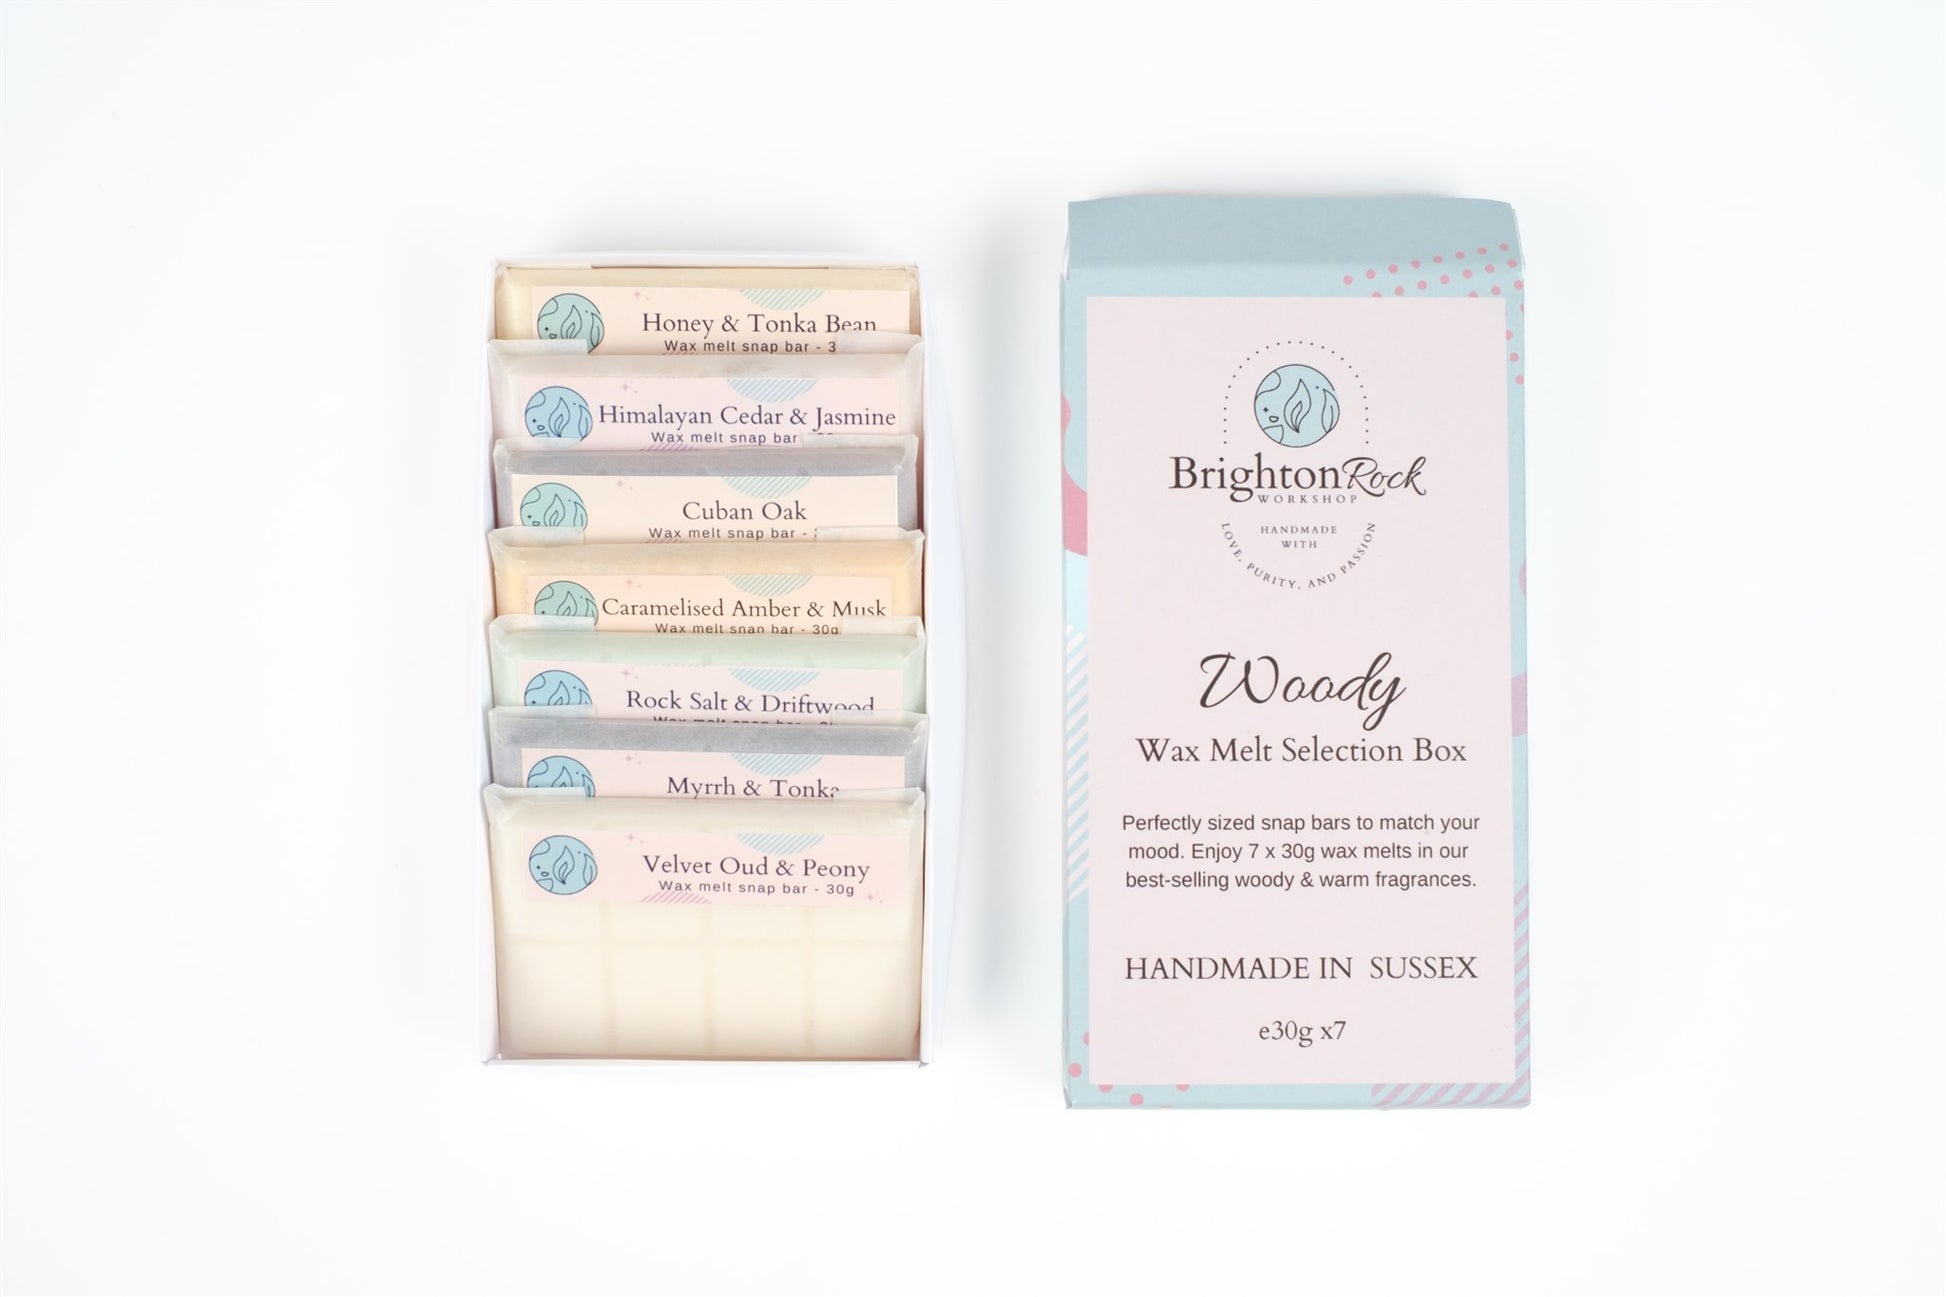 woody wax melt selection box. 7 x 30g bars of luxury and high quality woody scents in plant based wax. vegan and handmade in the UK. Brighton Rock Workshop